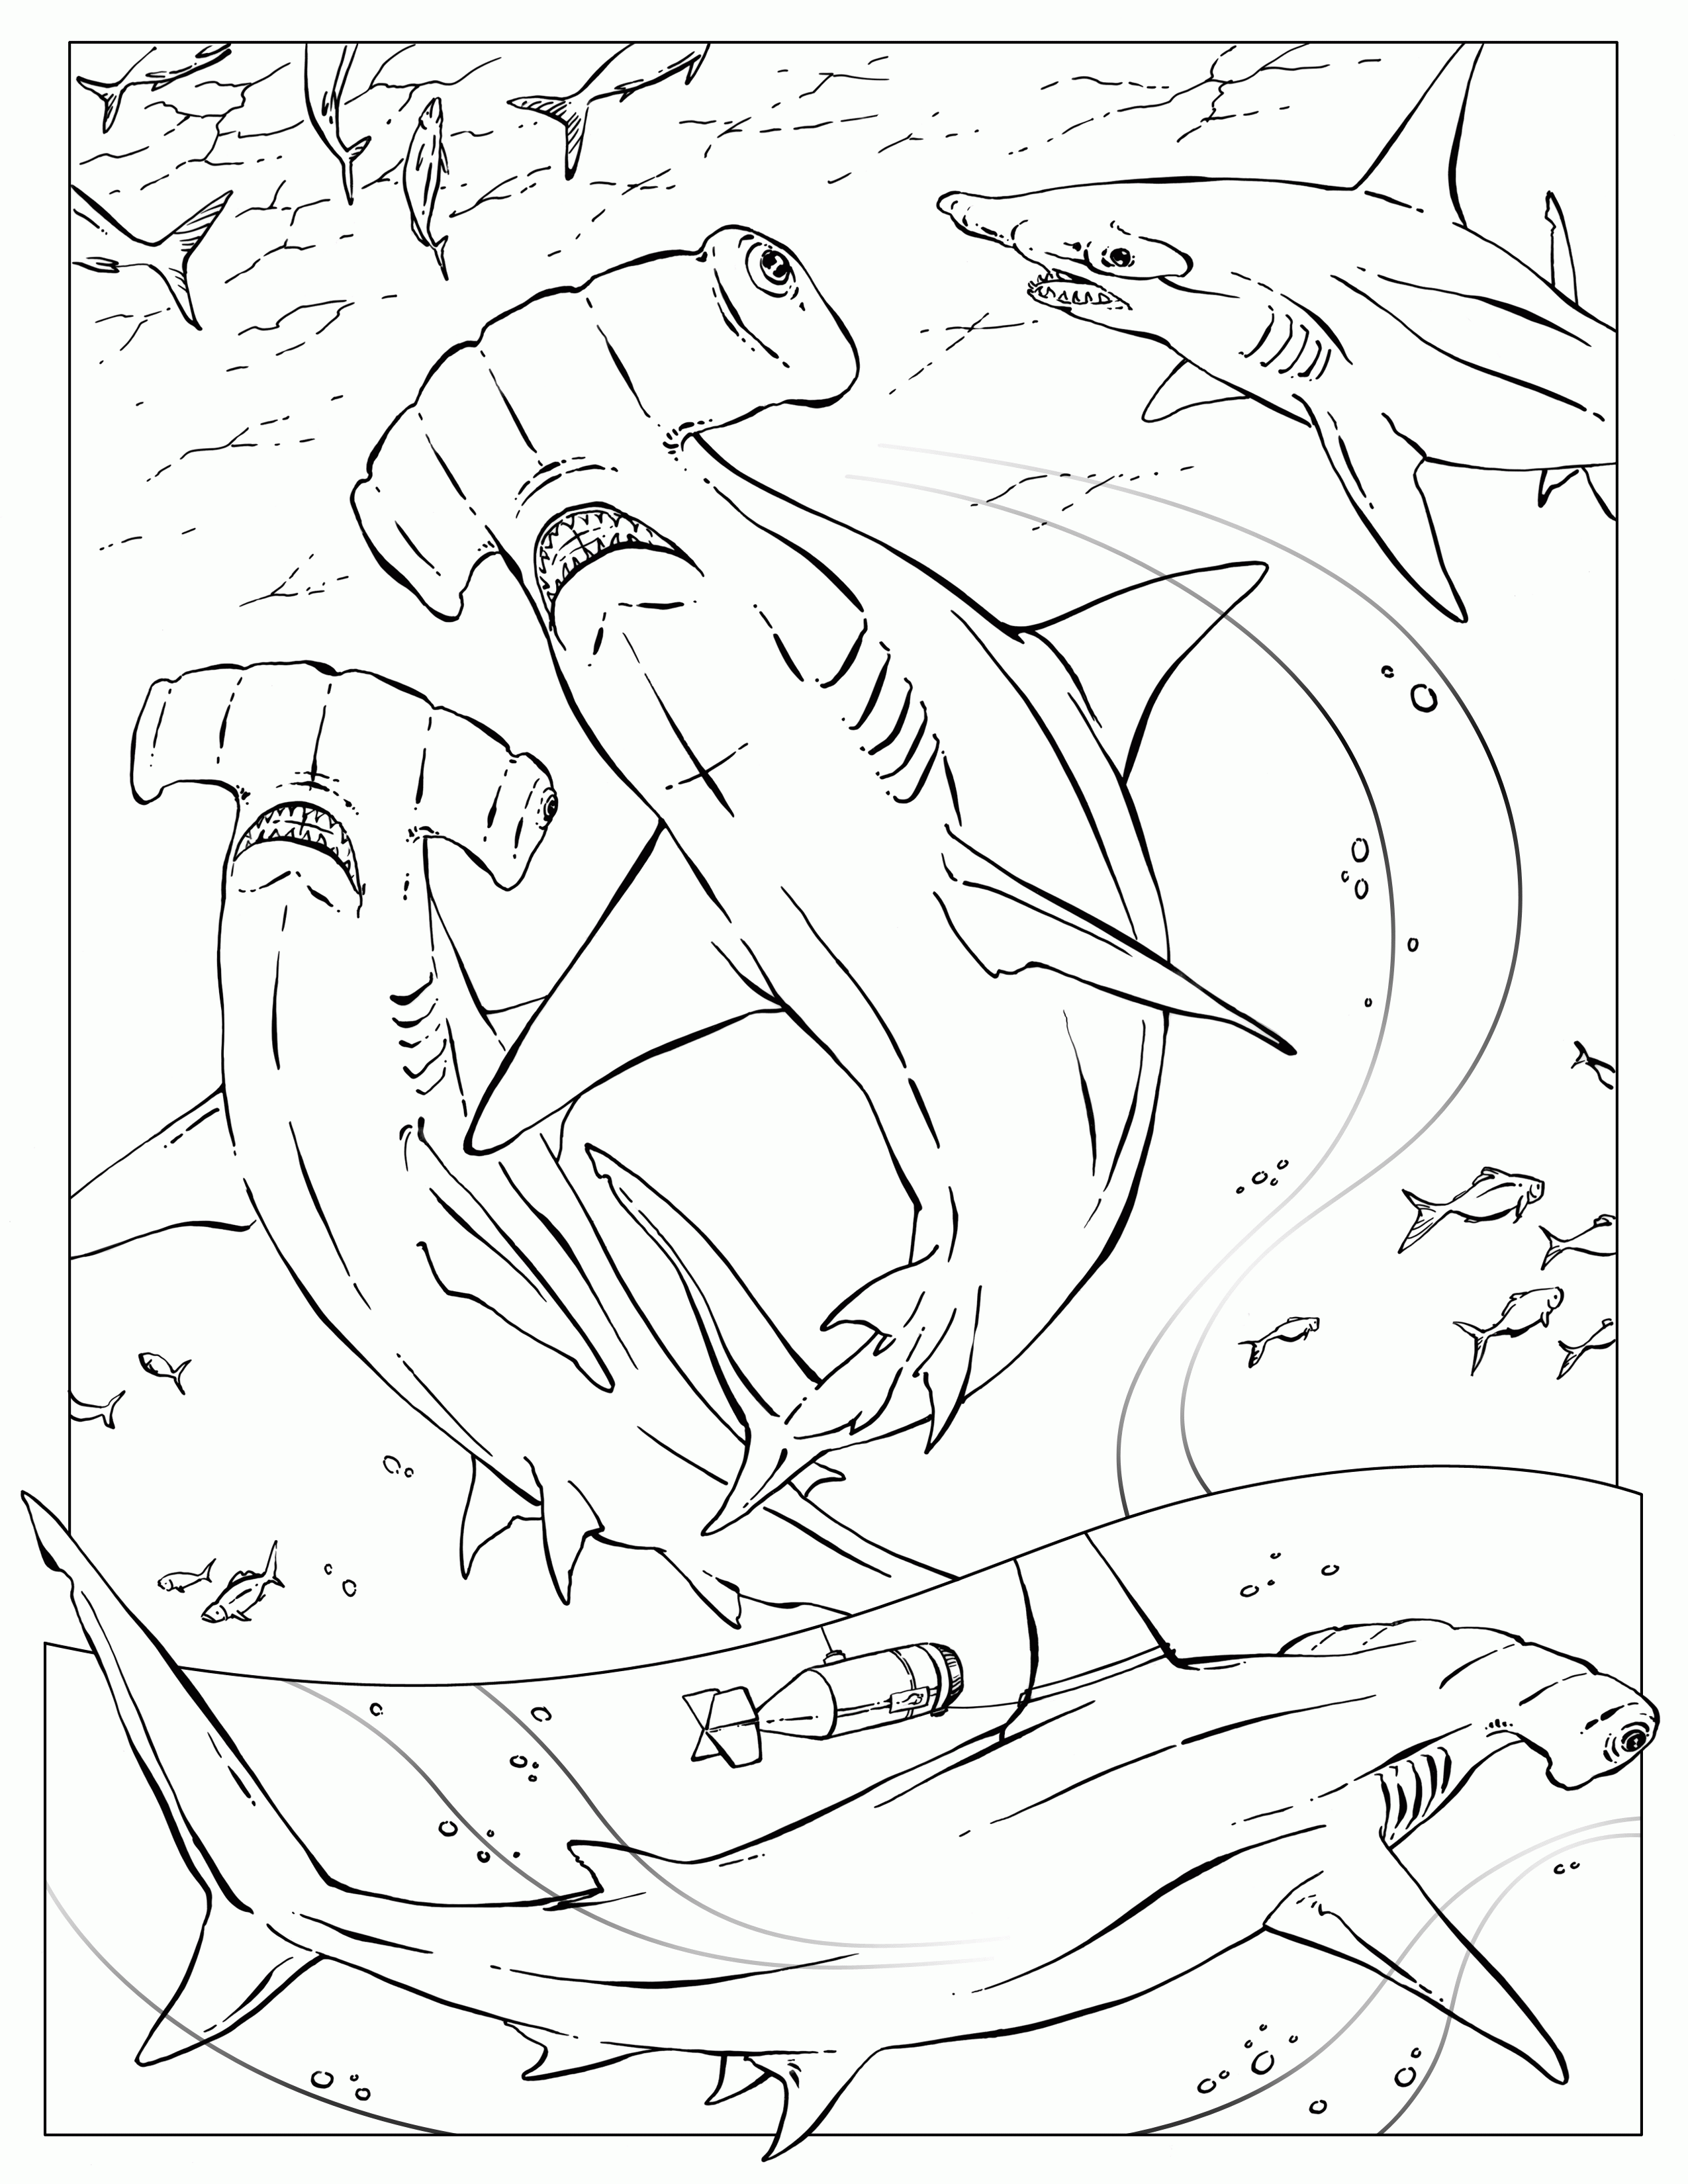 Hammerhead Shark Coloring Pages Free - Coloring Home